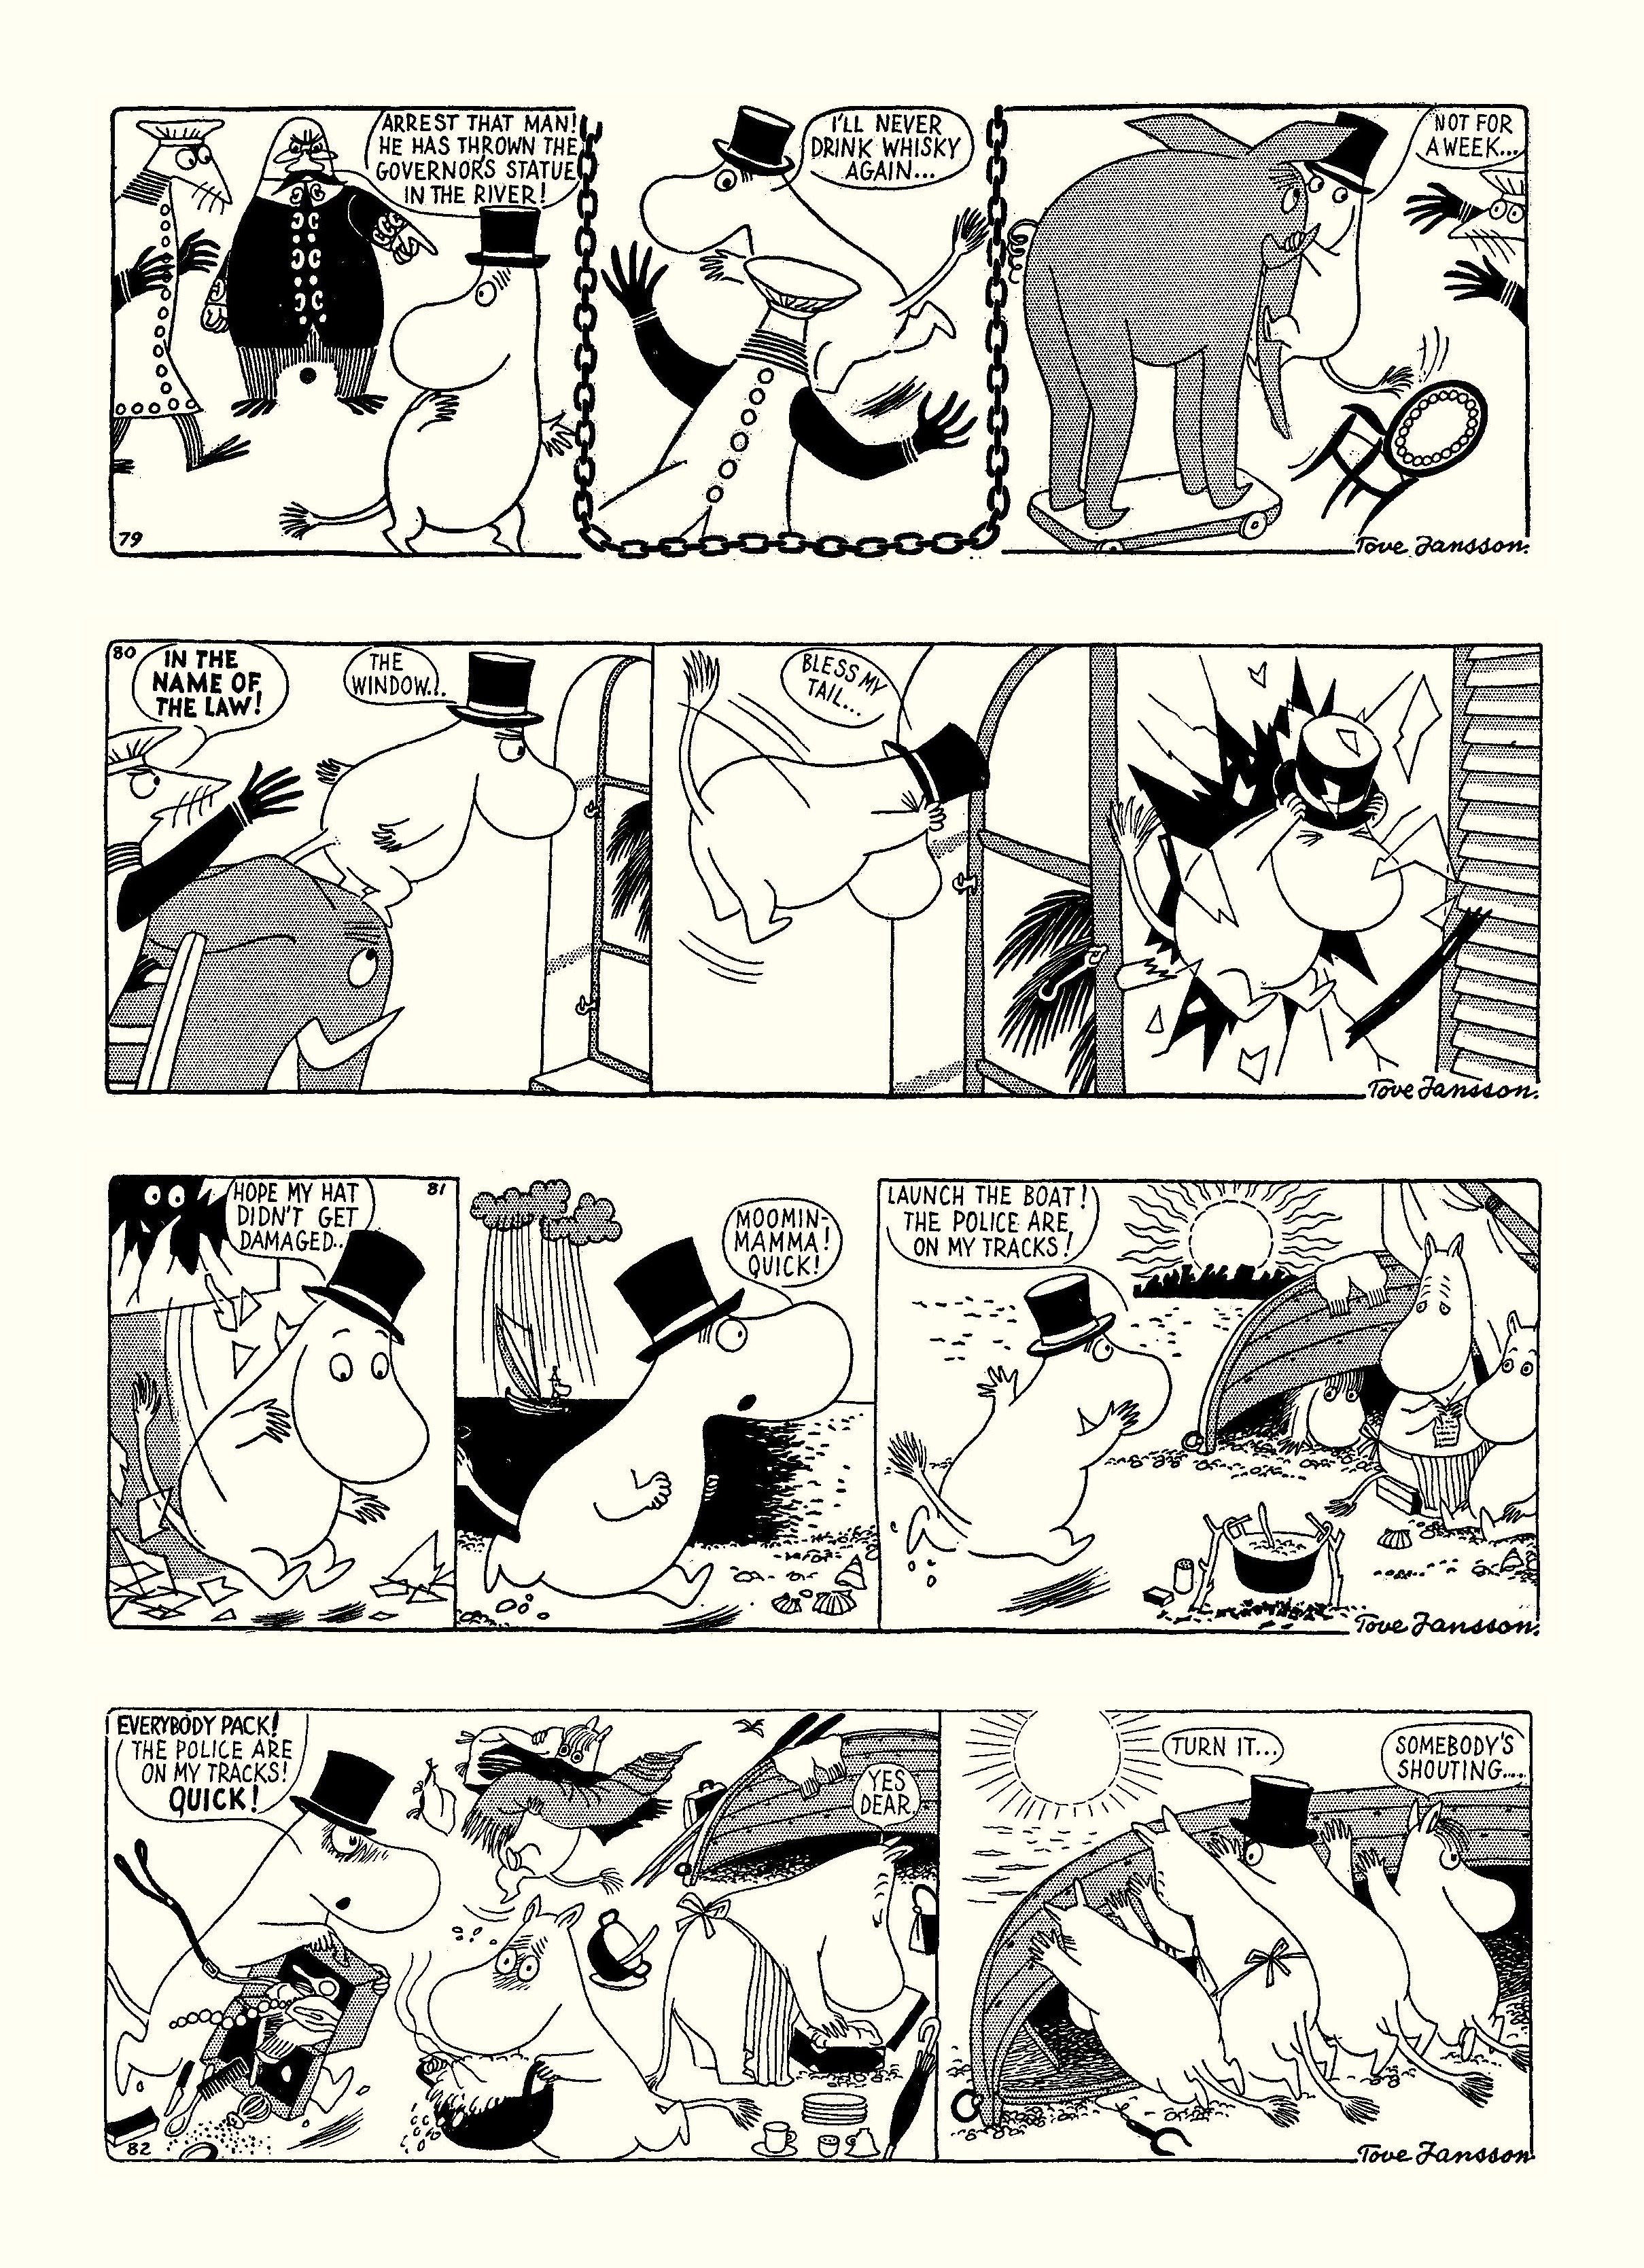 Read online Moomin: The Complete Tove Jansson Comic Strip comic -  Issue # TPB 1 - 68